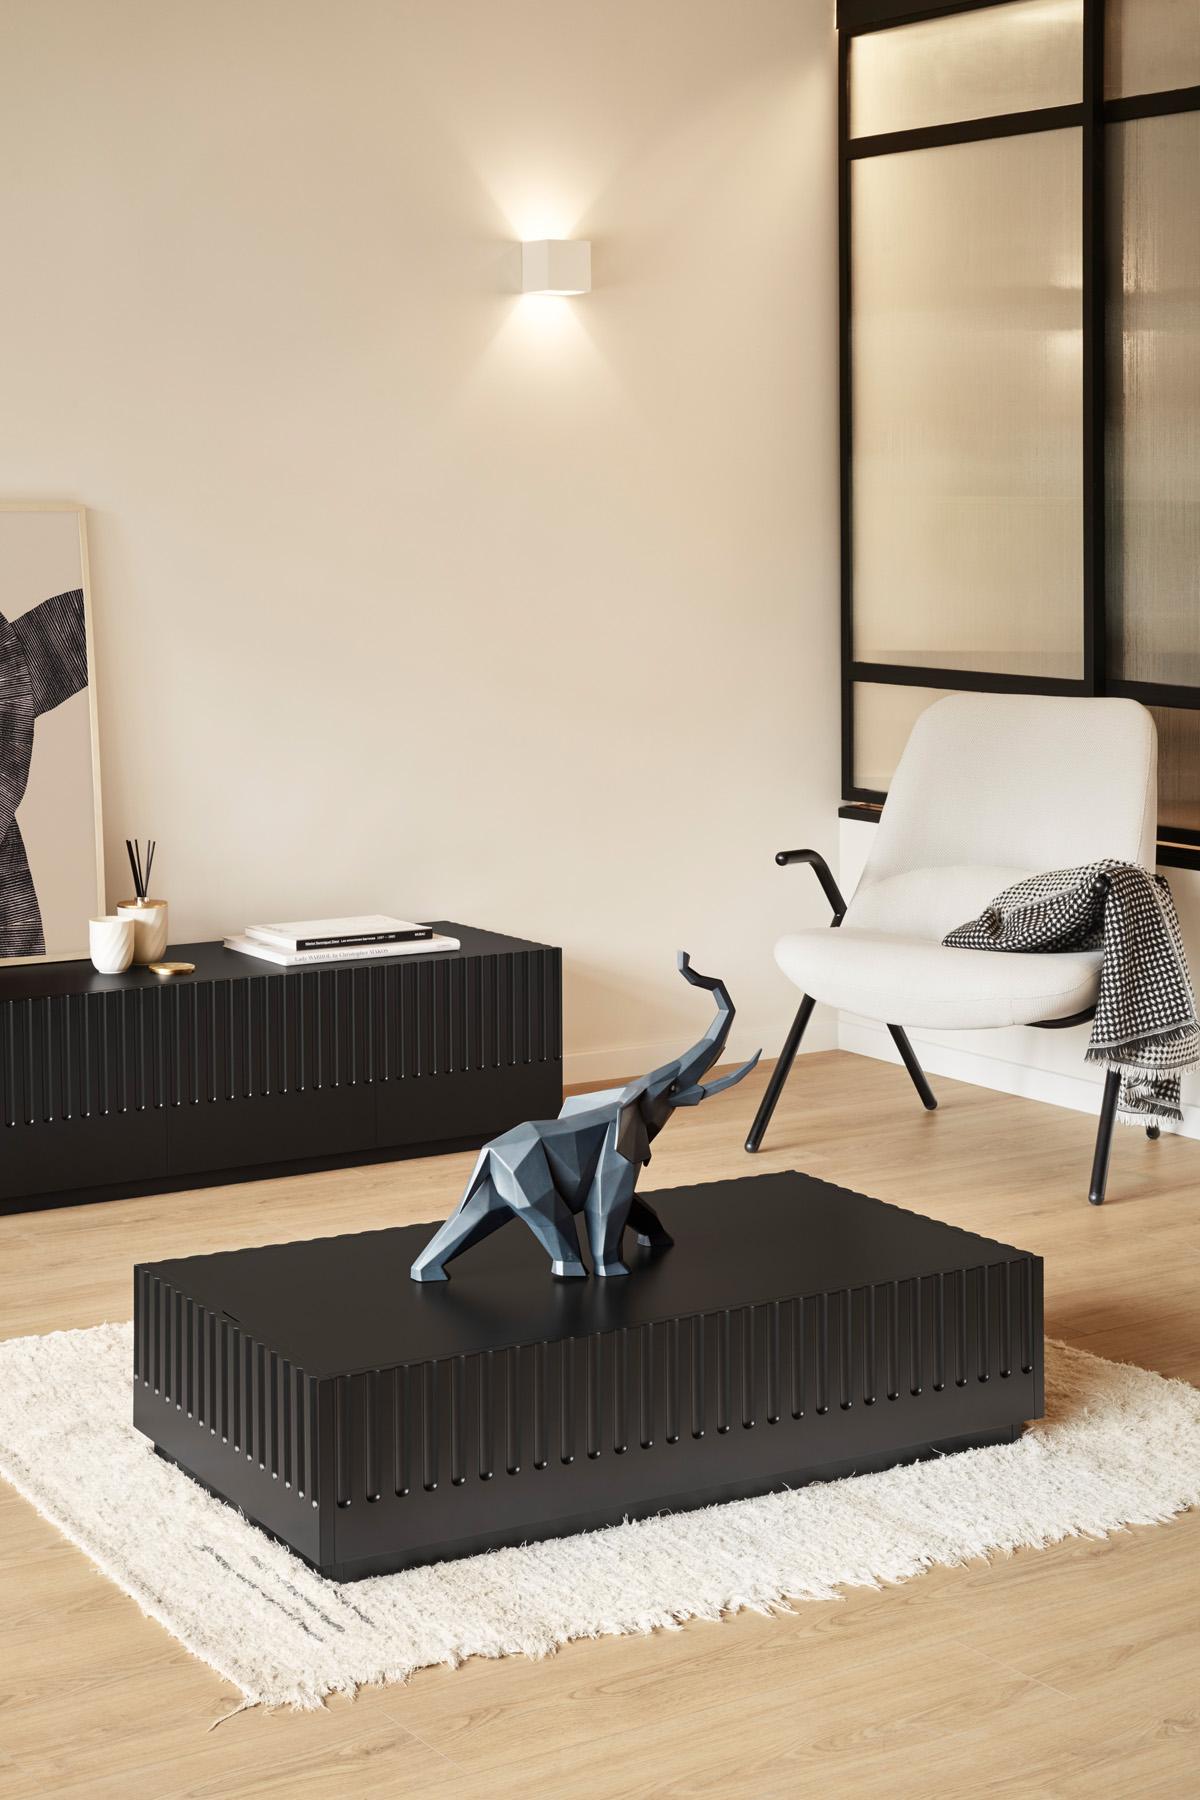 Matte black porcelain creation inspired by an African elephant from the Origami collection. This striking African elephant is the latest addition to the Origami collection. When it is depicted with its trunk pointed upwards, this animal symbolizes